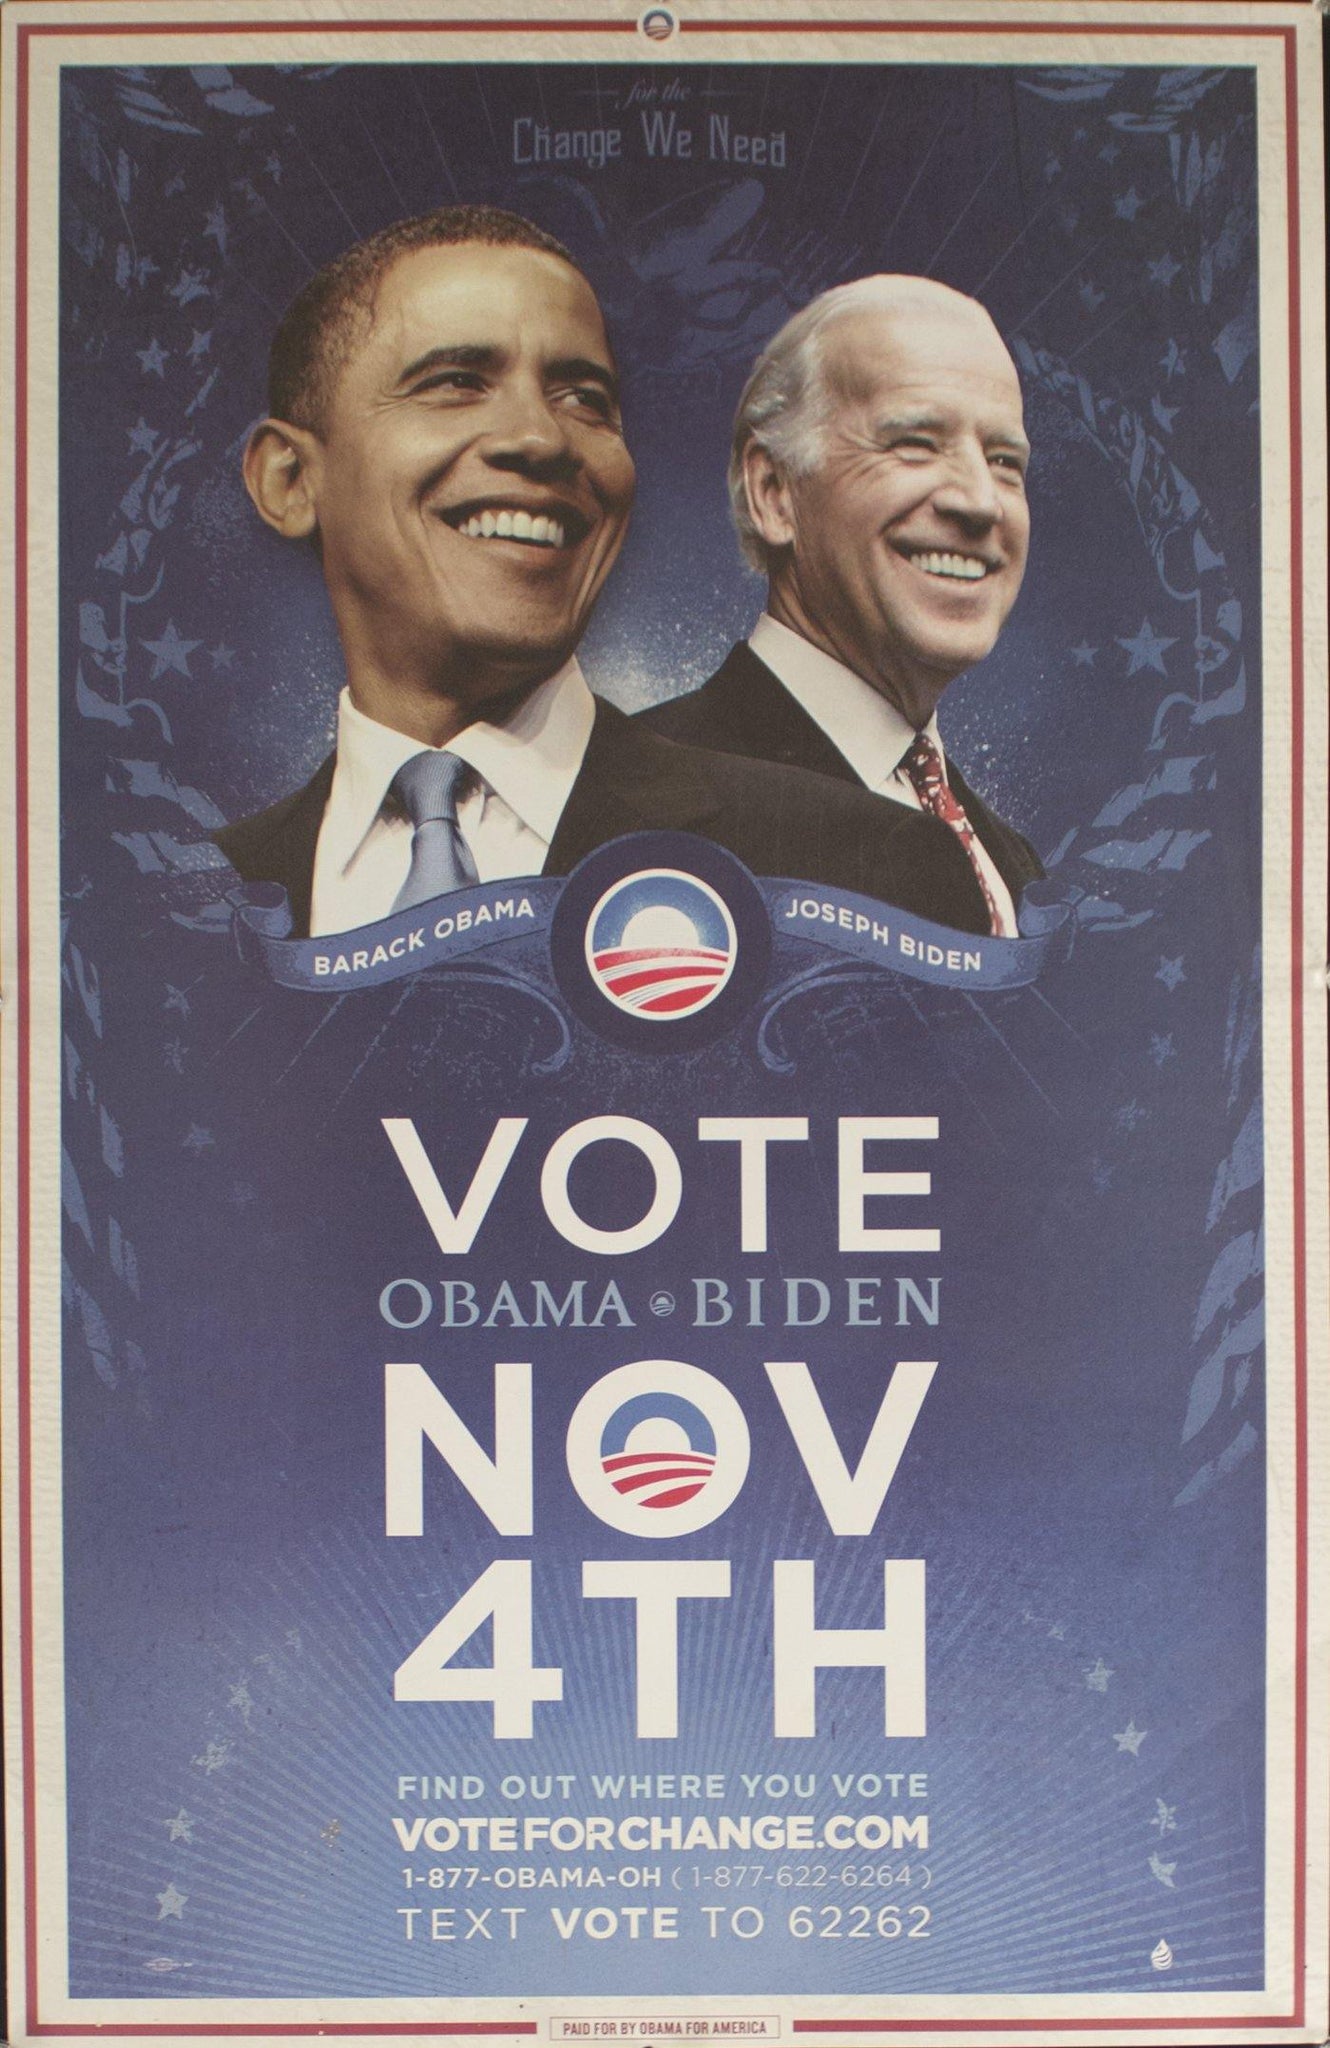 2008 For The Change We Need Vote Obama-Biden November 4th Find out where you vote voteforchange.com - Golden Age Posters